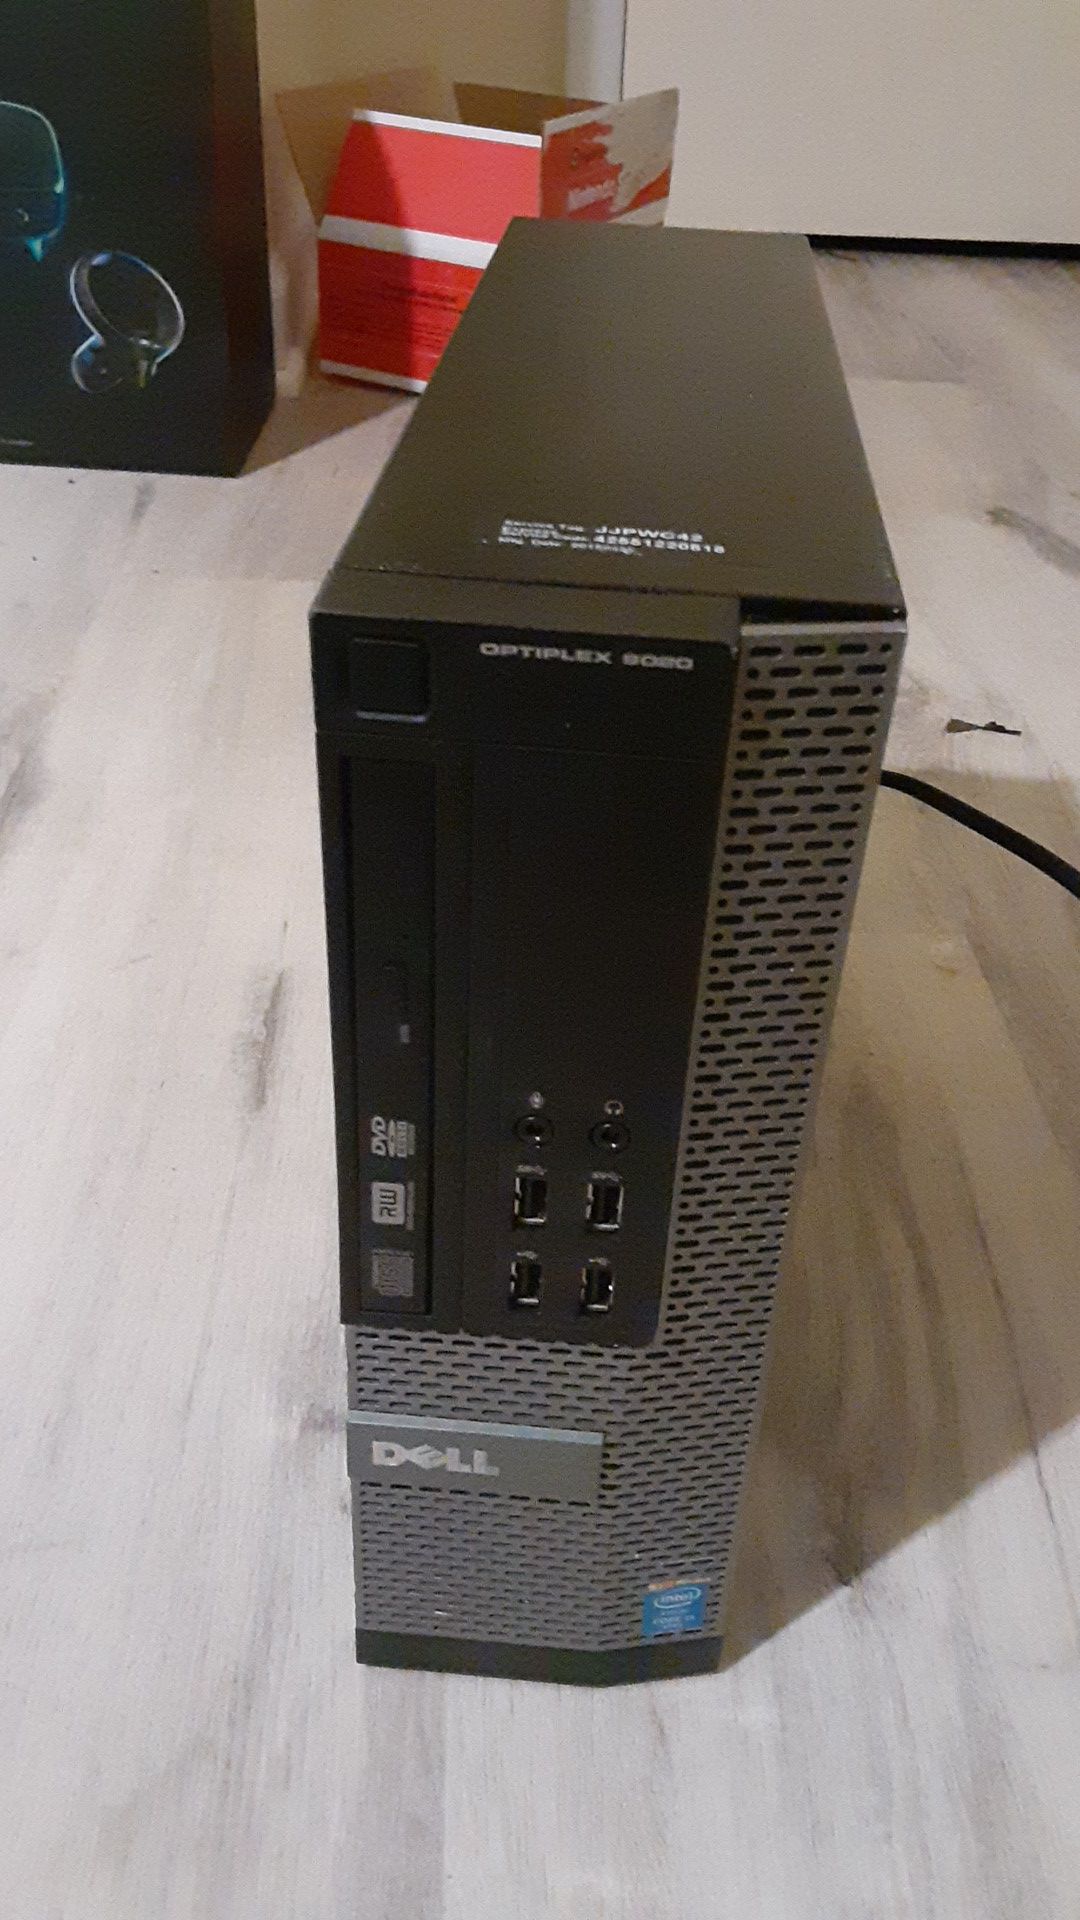 Low budget gameing pc, 500gb, 16gb ram, i5-4590 graphics card